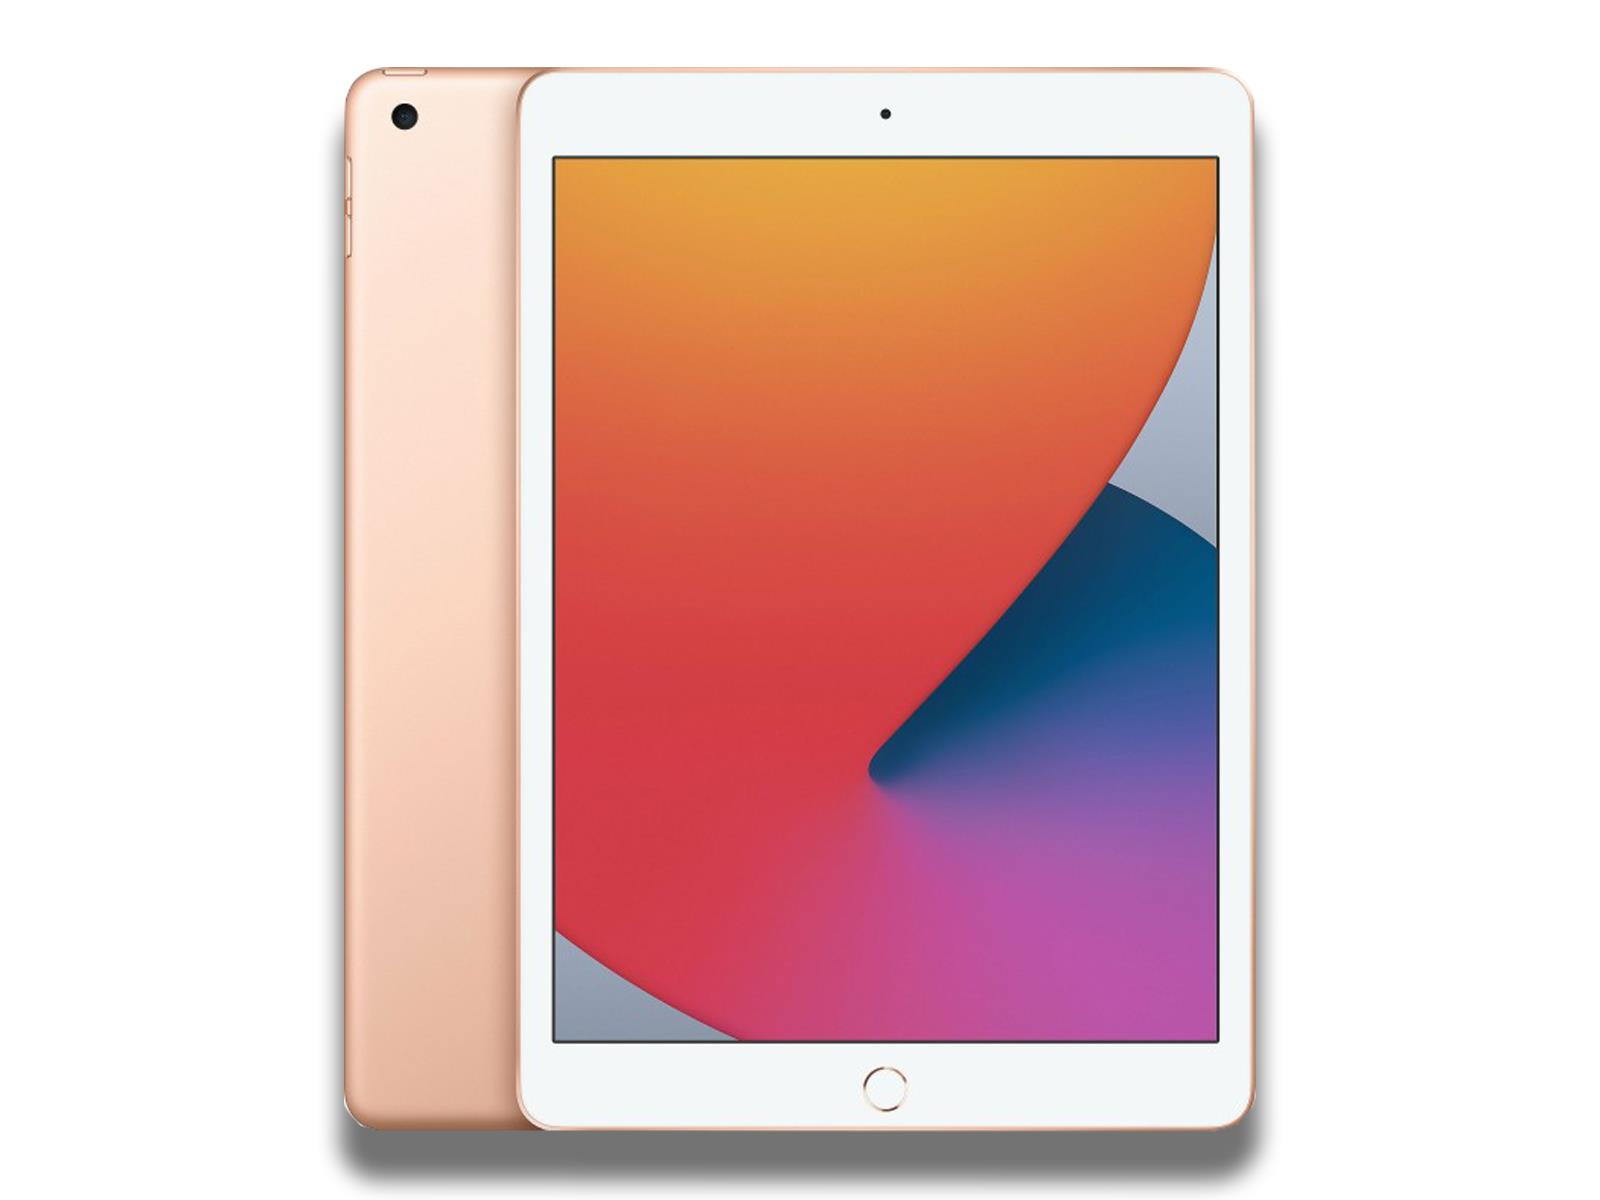 Image shows a front and back view of the Gold Apple iPad 8